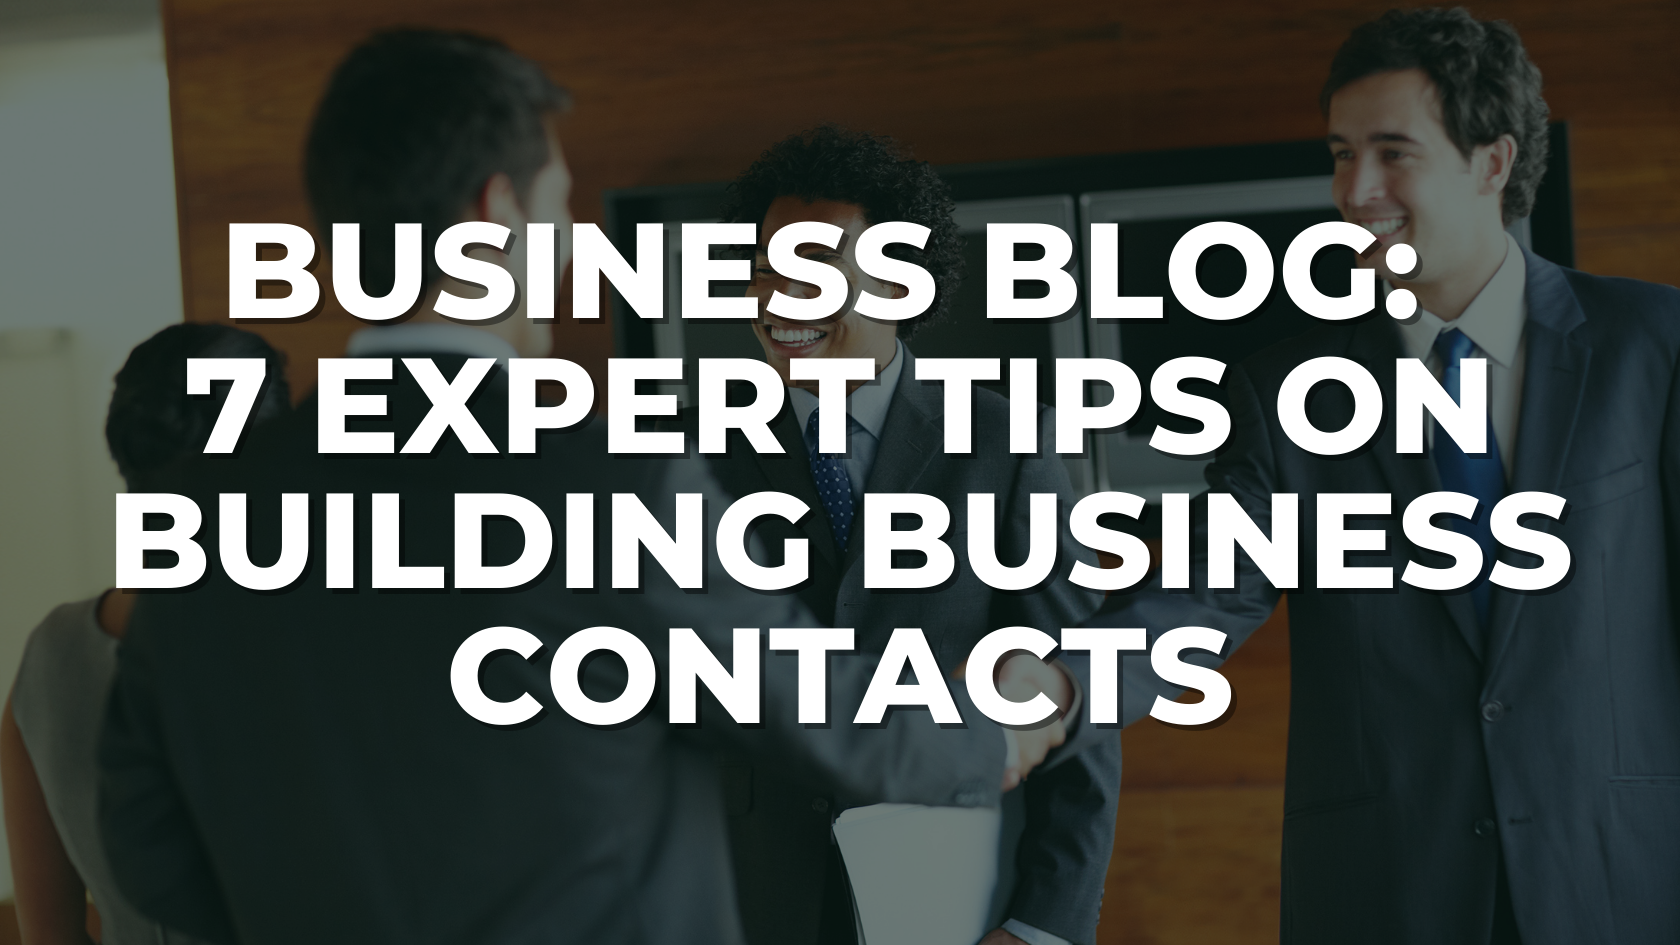 7 Expert Tips On Building Business Contacts